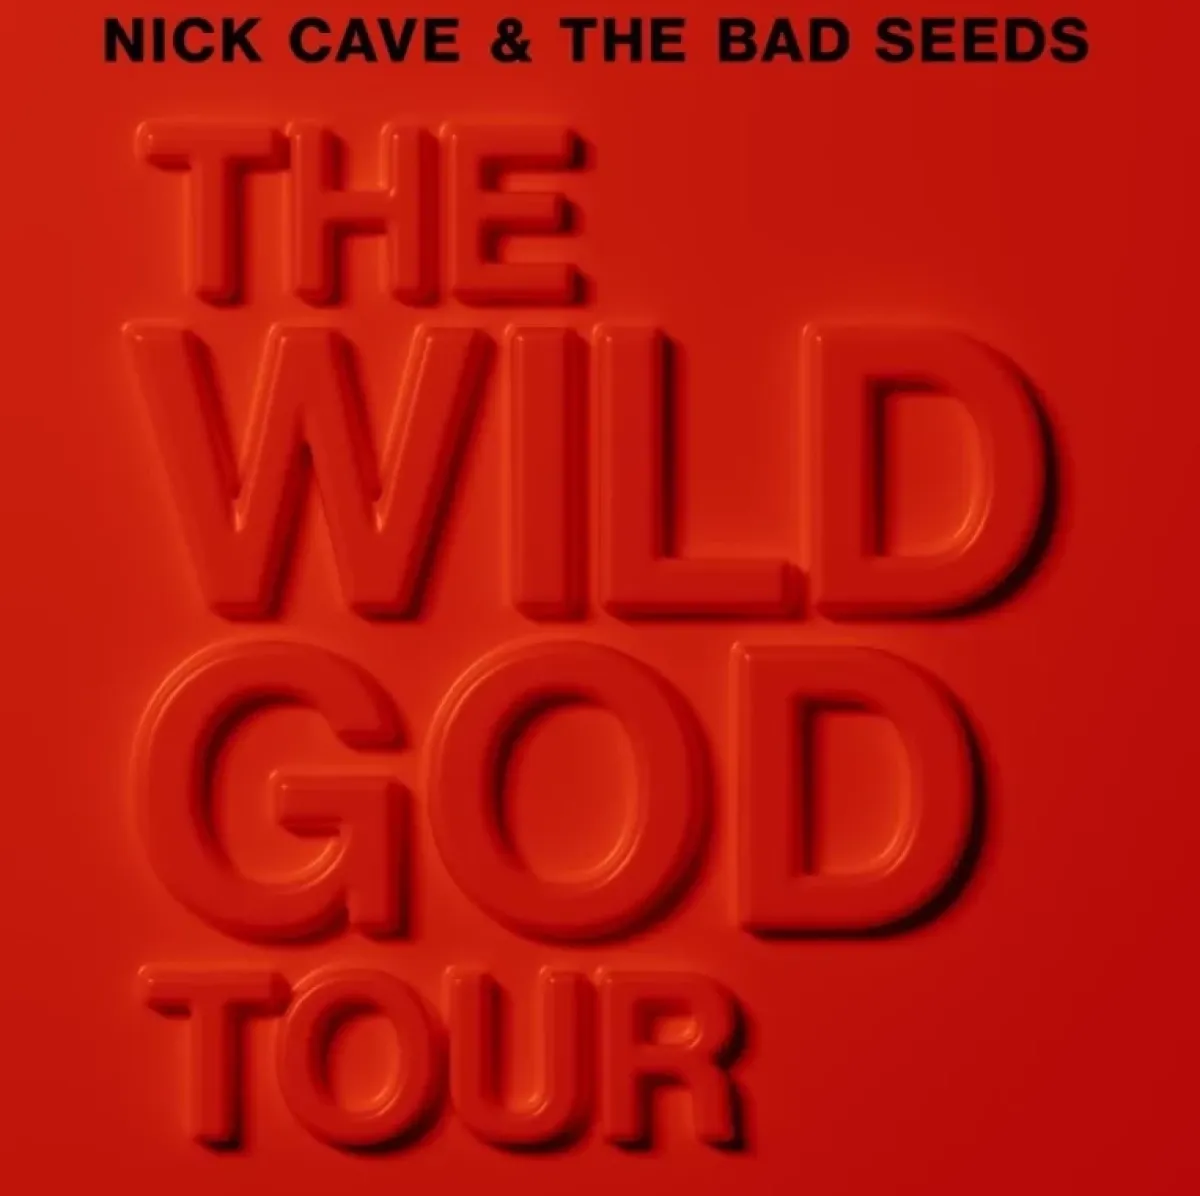 Billets Nick Cave And The Bad Seeds (Utilita Arena Cardiff - Cardiff)